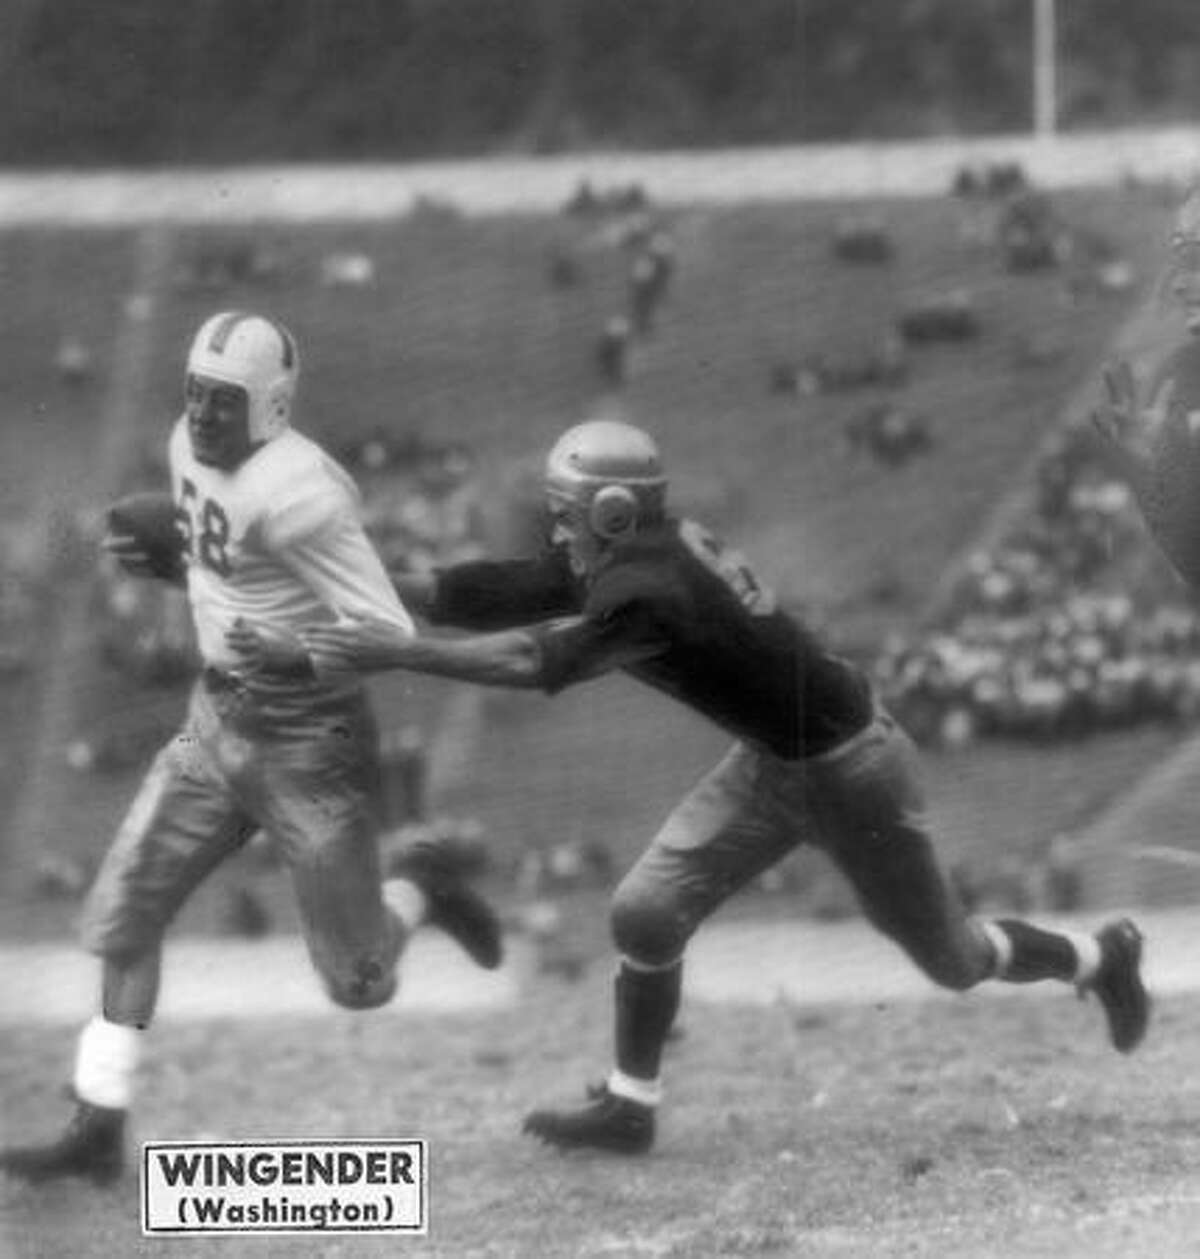 John Wingender (58) Washington halfback, speeds on his way for a gain against California. The Oct. 1945 game was in Berkeley.